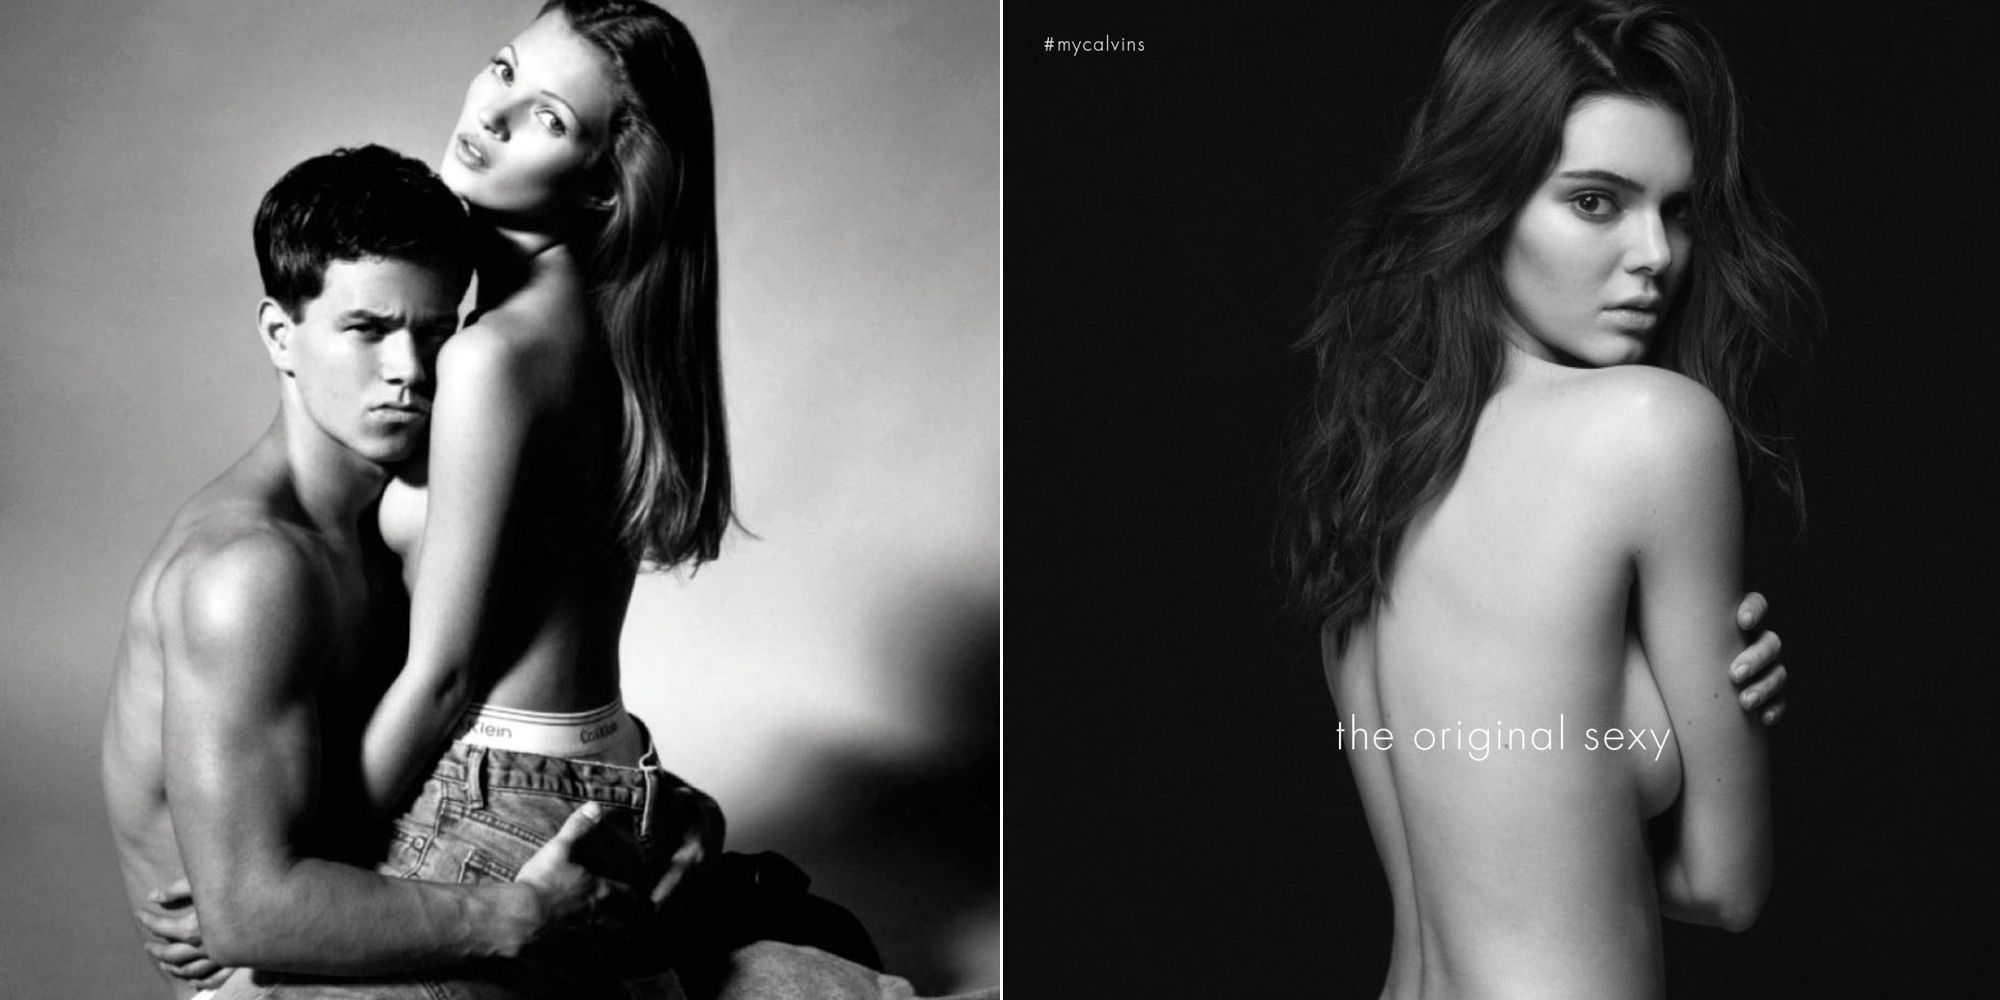 The Hottest Calvin Klein Ads of All Time